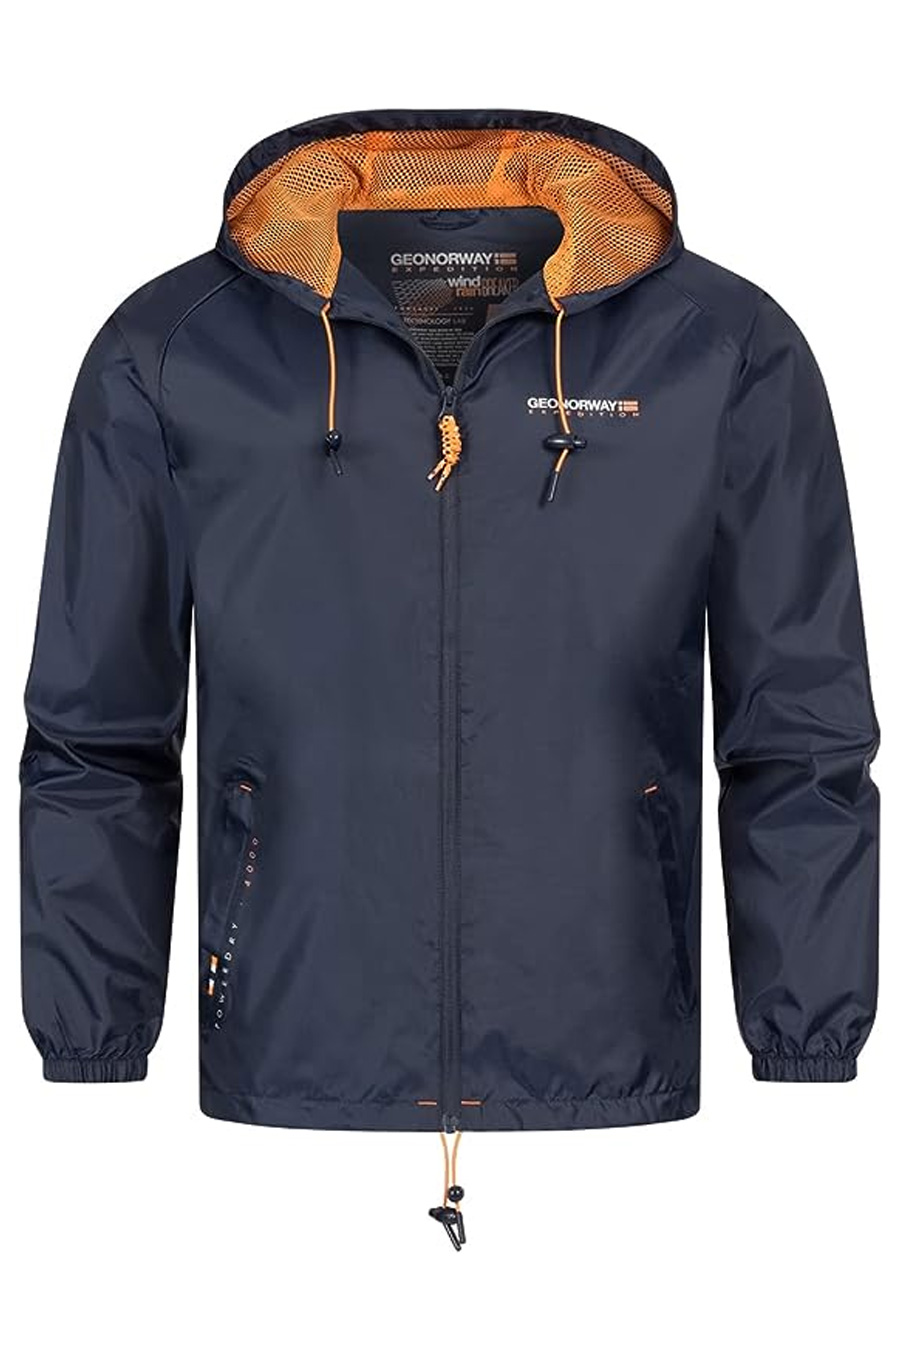 Vėjo striukė GEOGRAPHICAL NORWAY BOAT-Navy